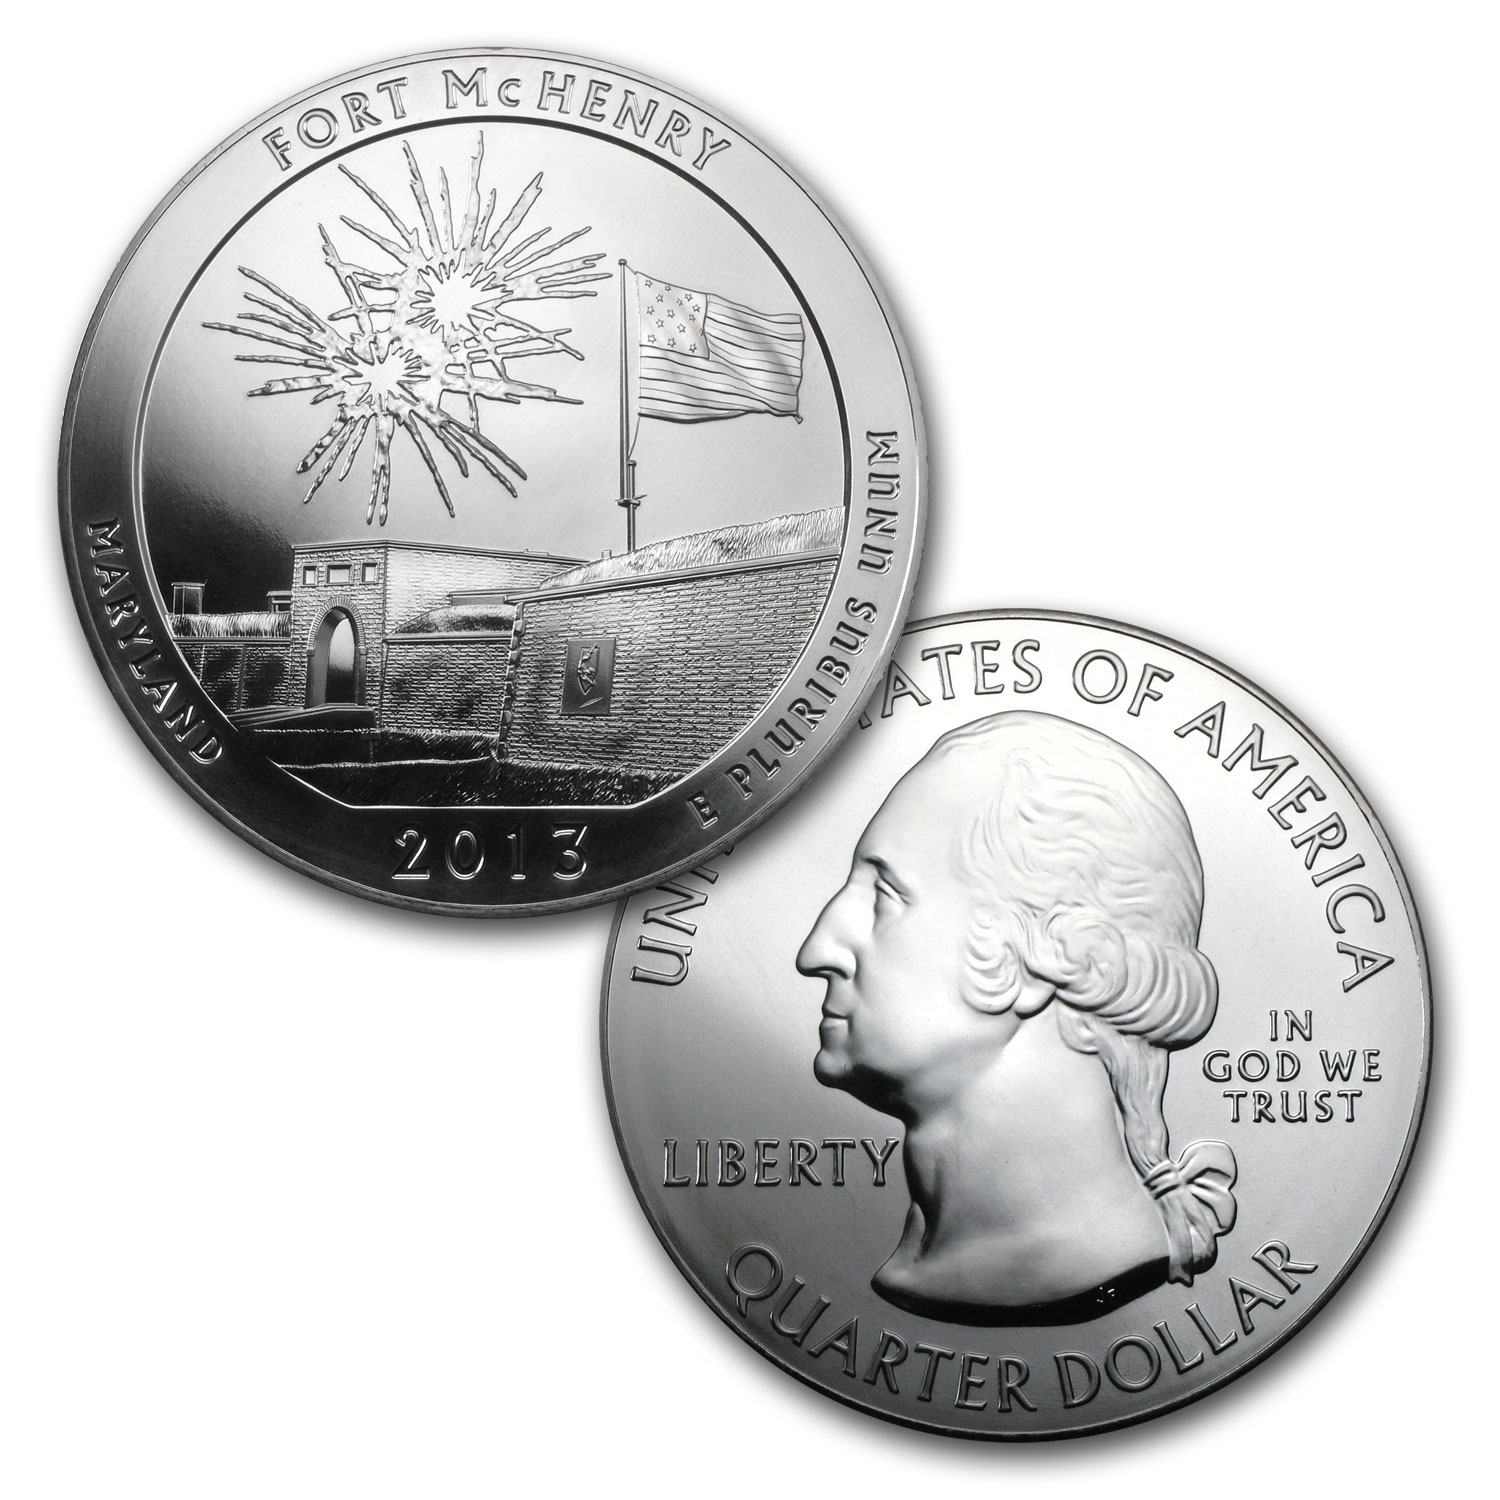 america the beautiful 5 oz silver coins for sale